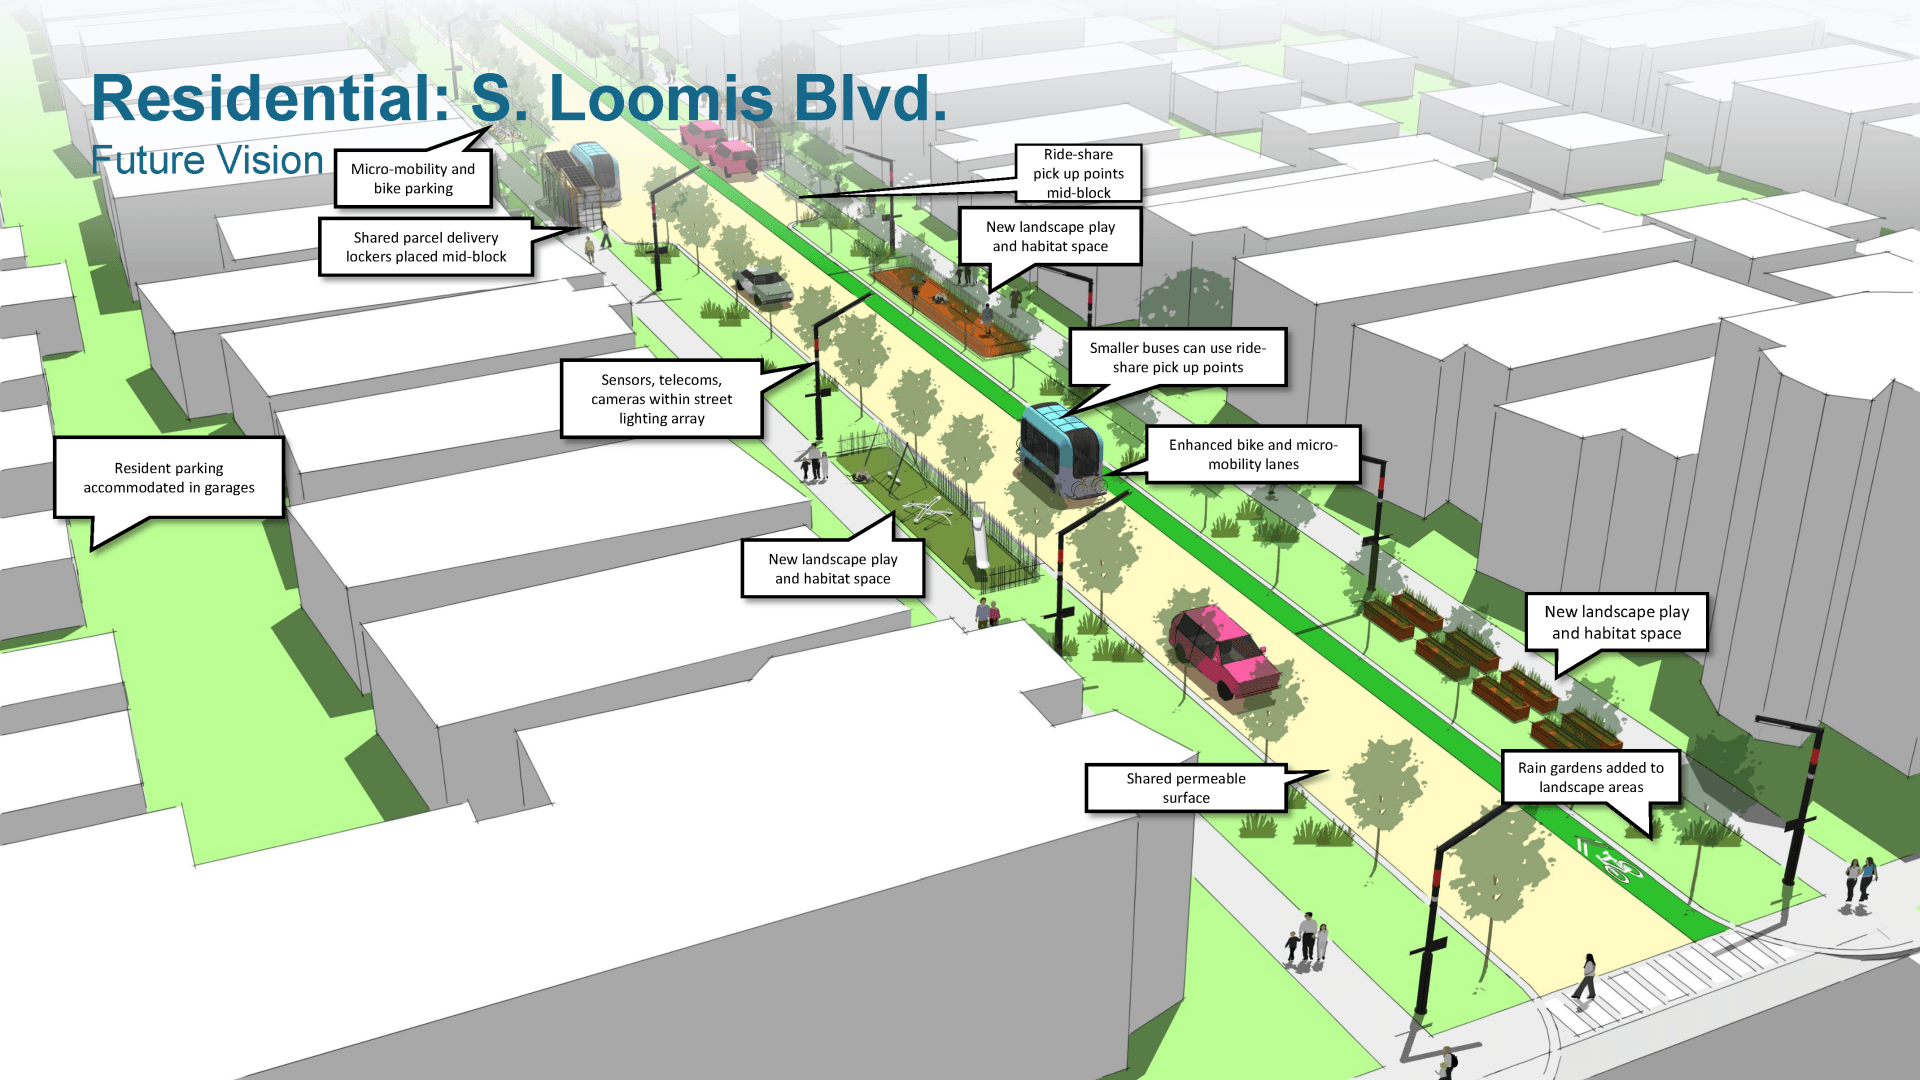 Illustration of 26th Street's future vision in 2030